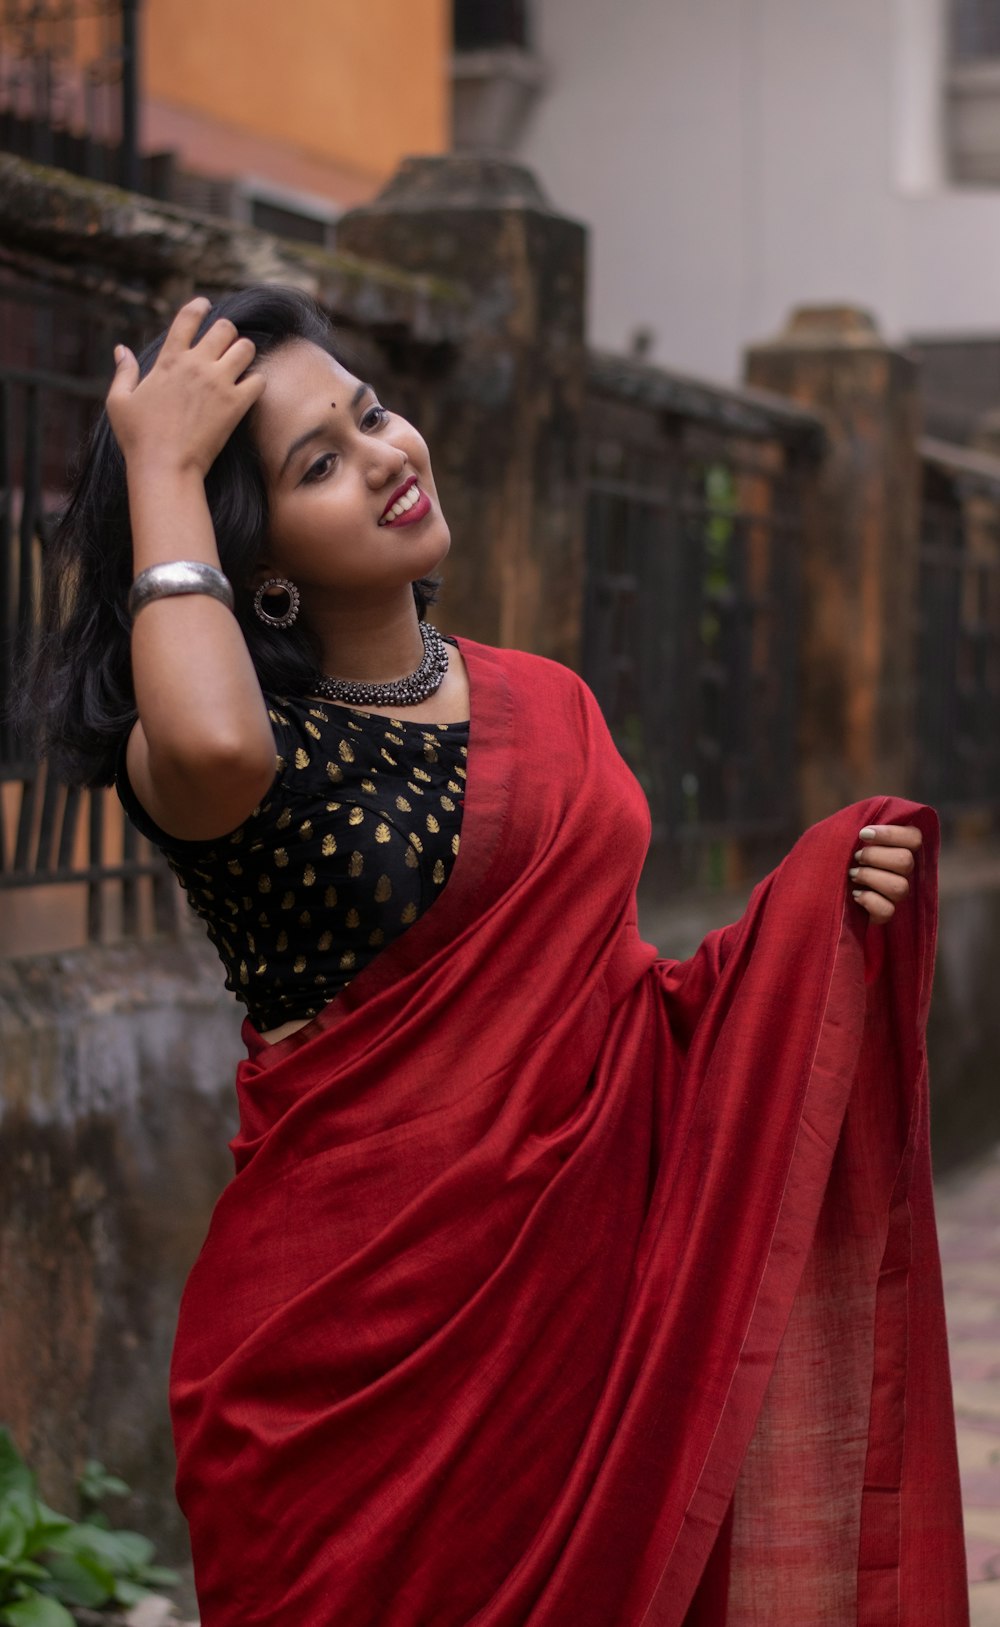 A woman in a red sari posing for the camera photo Free West bengal Image on Unsplash